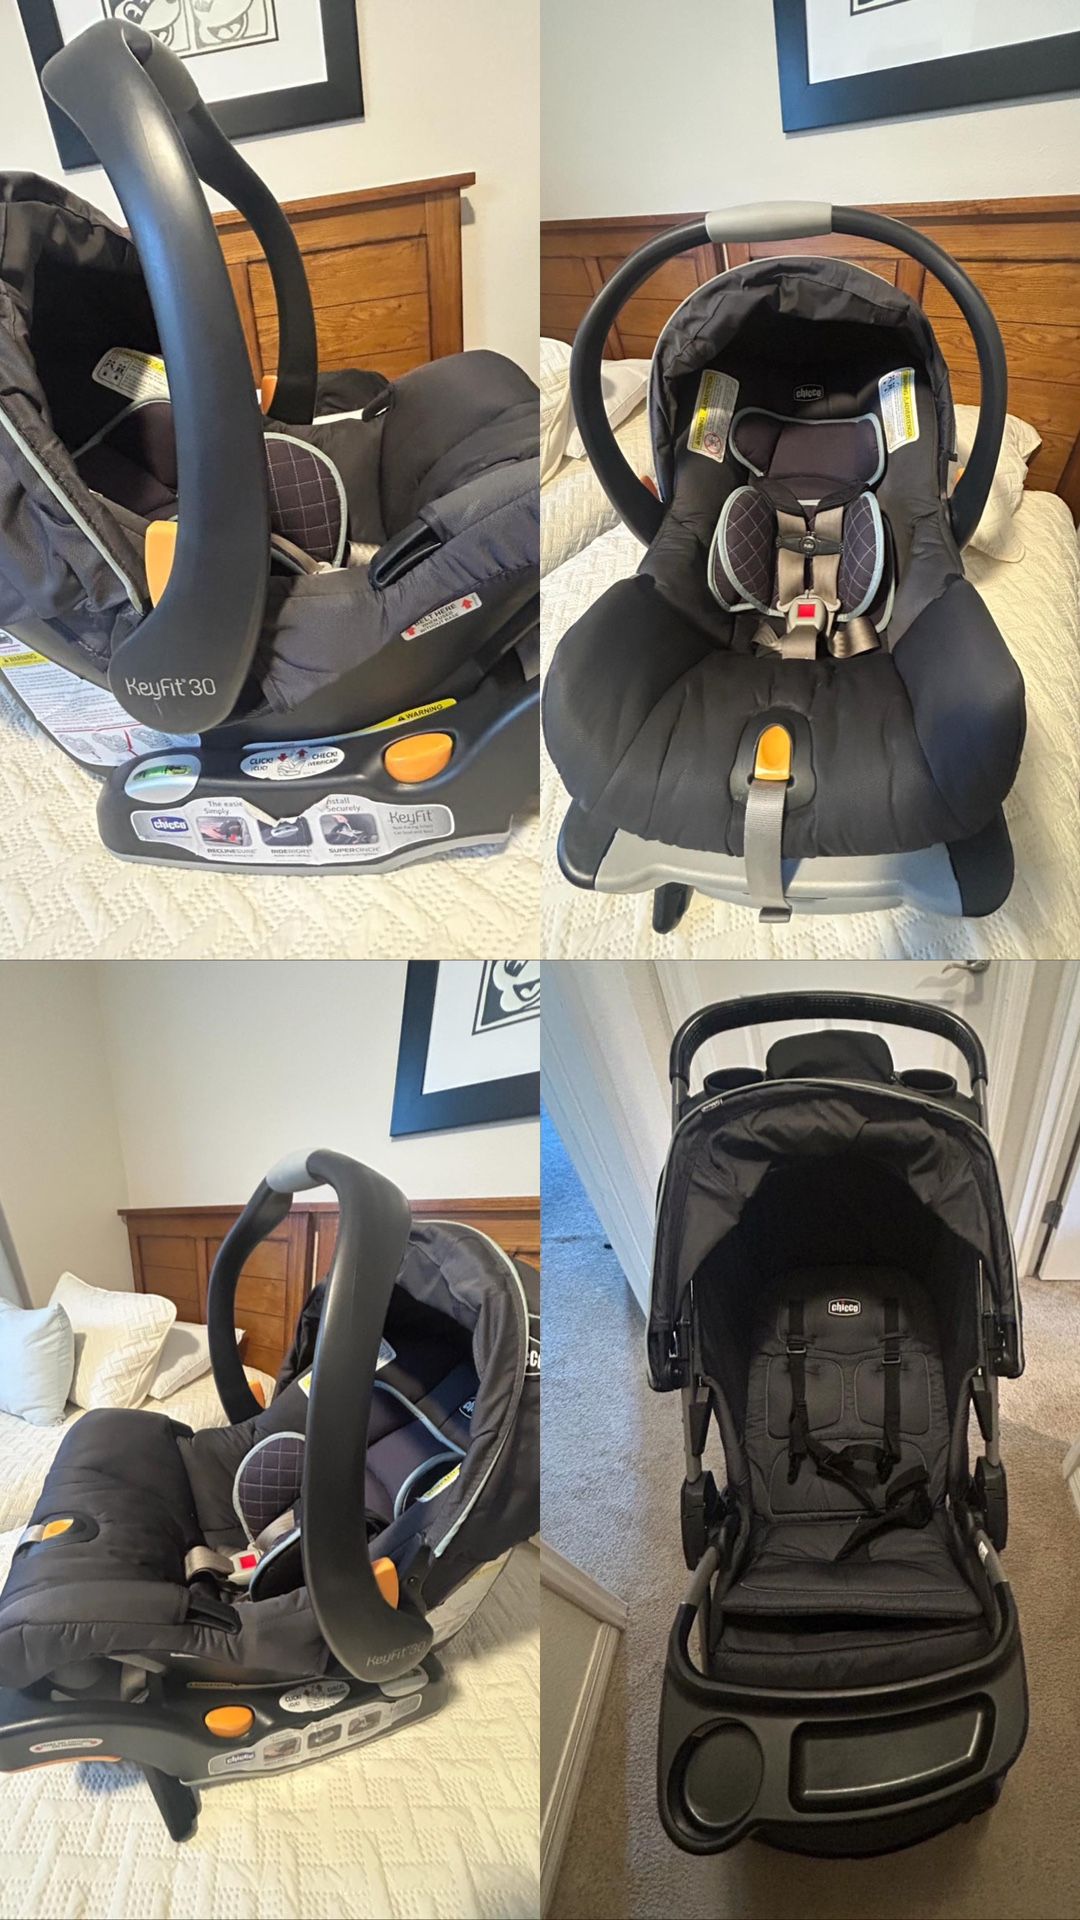 Used Chicco Bravo 3-in-1 Trio Travel System, Quick-Fold Stroller with KeyFit 30 Infant Car Seat and base